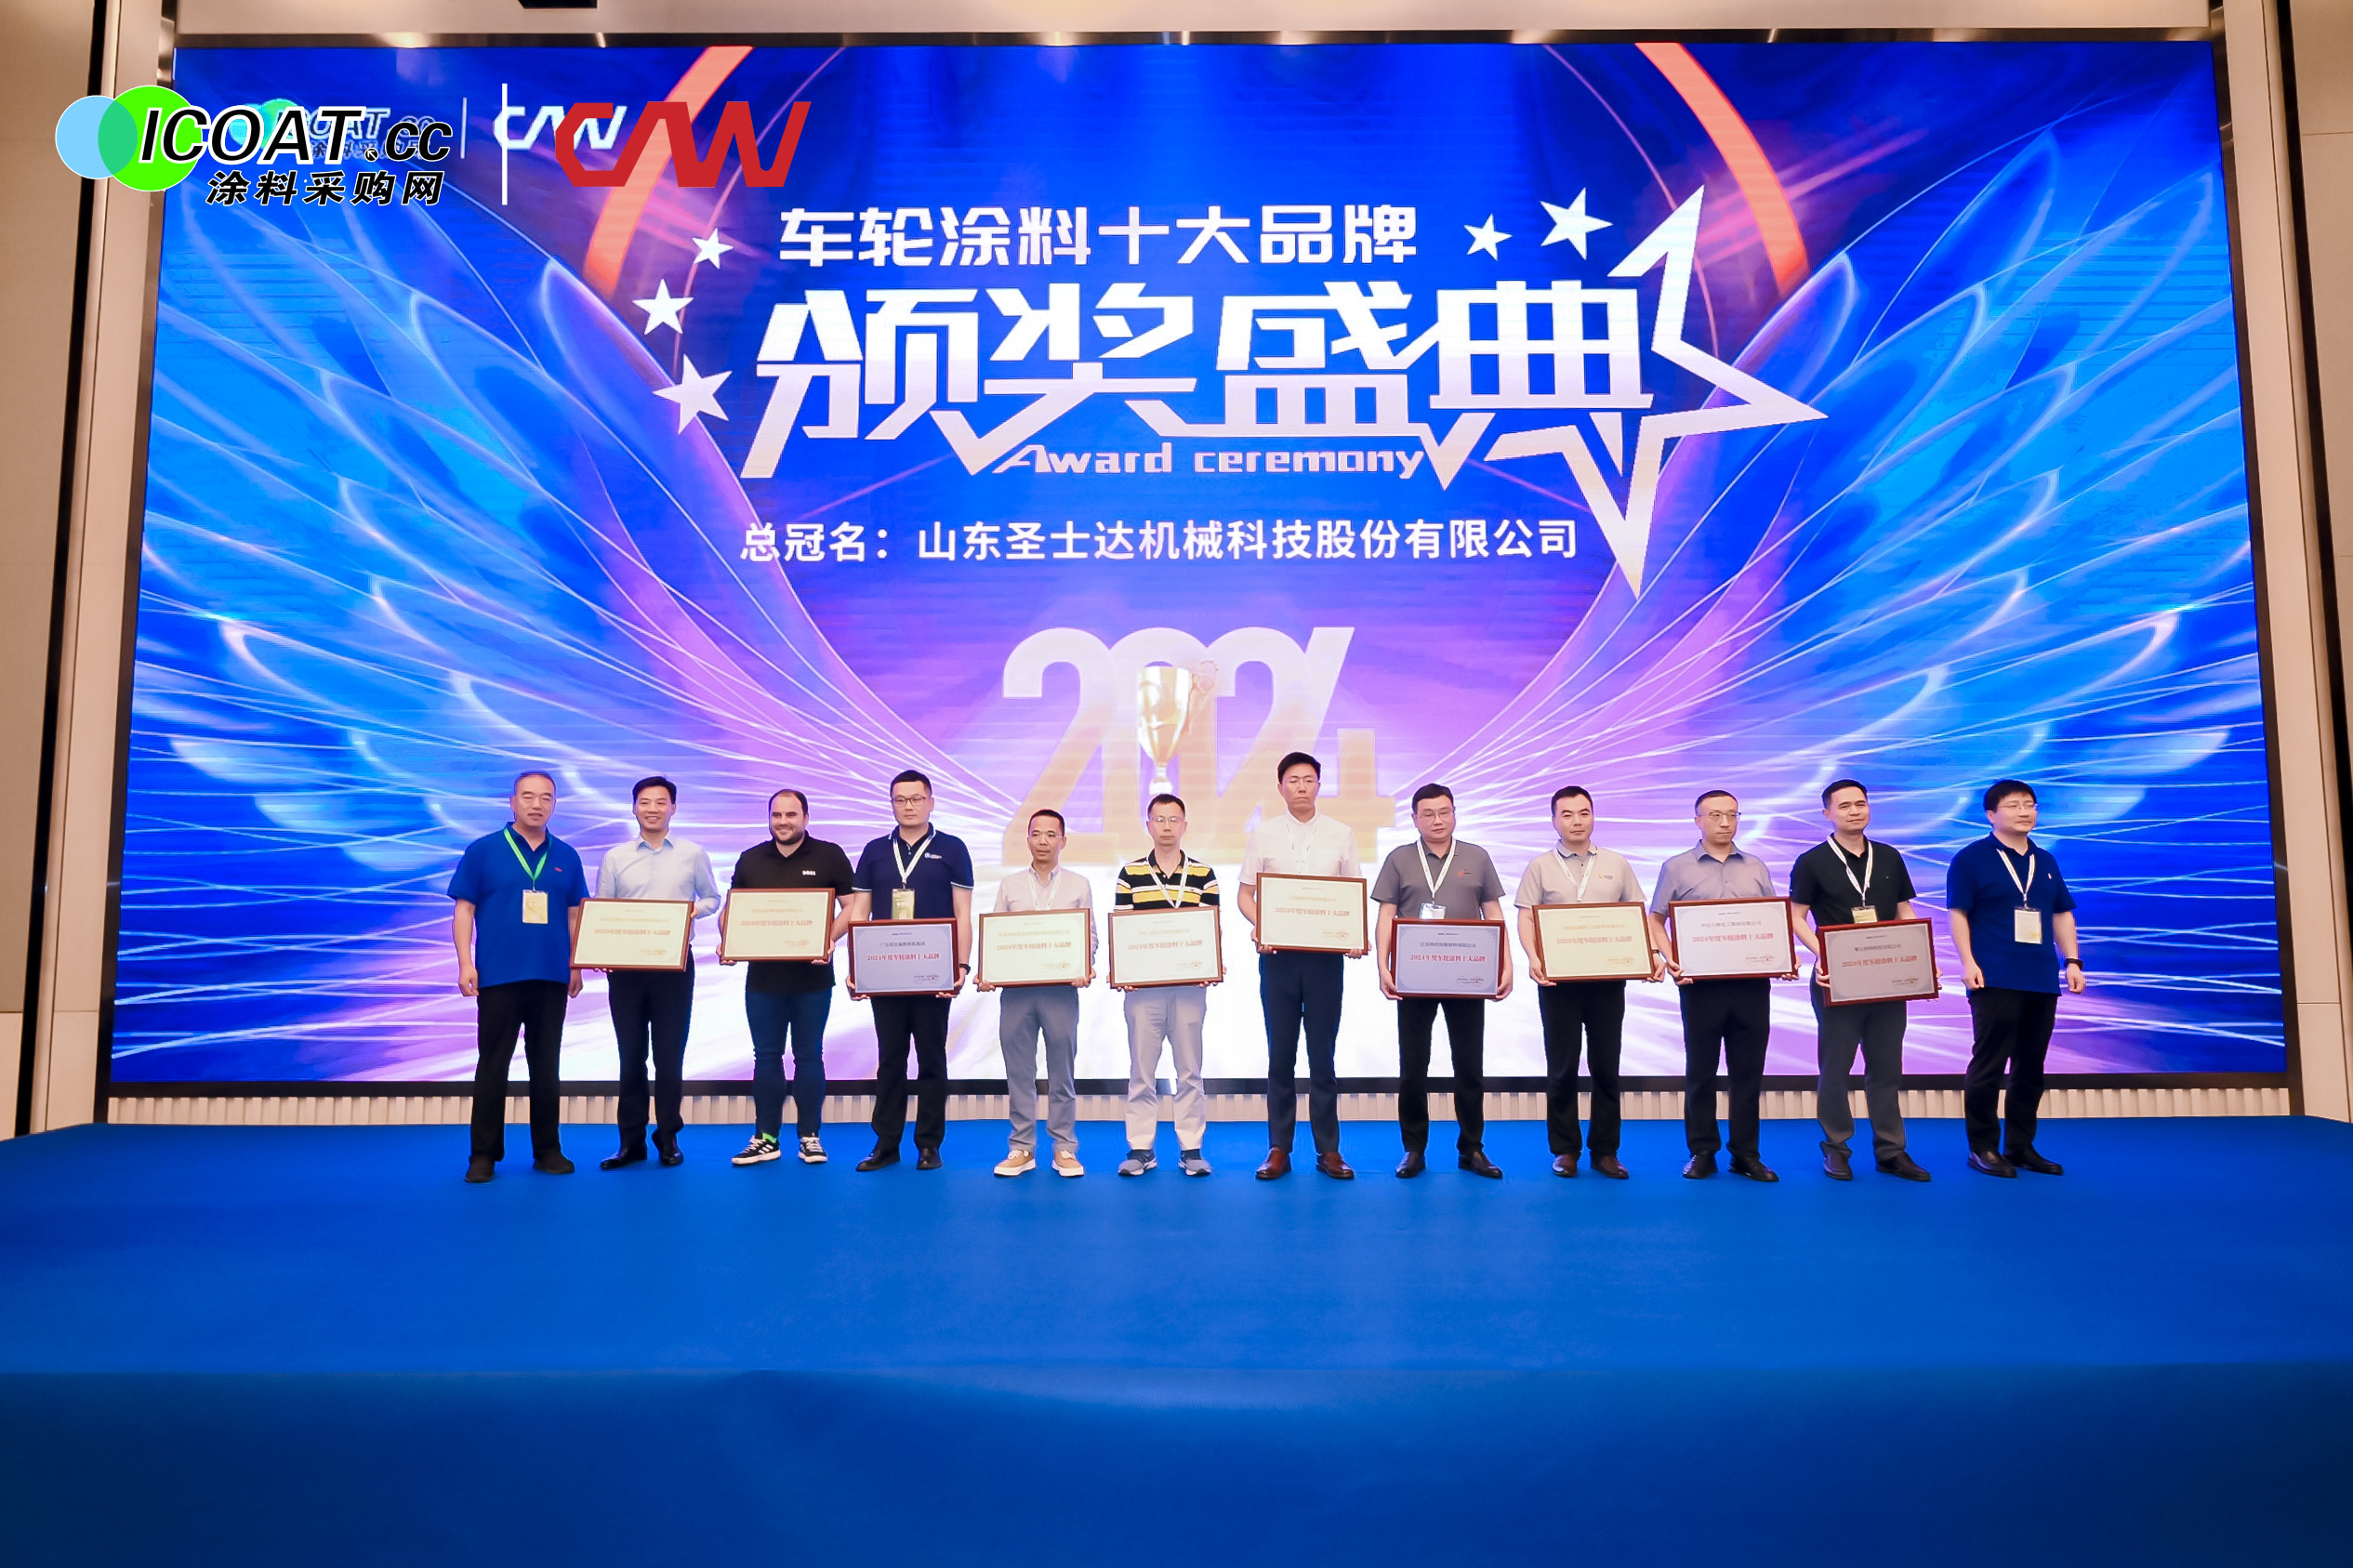 FreiLacke Chinais honoured as one of the top 10 paint suppliers for the wheel industry in China